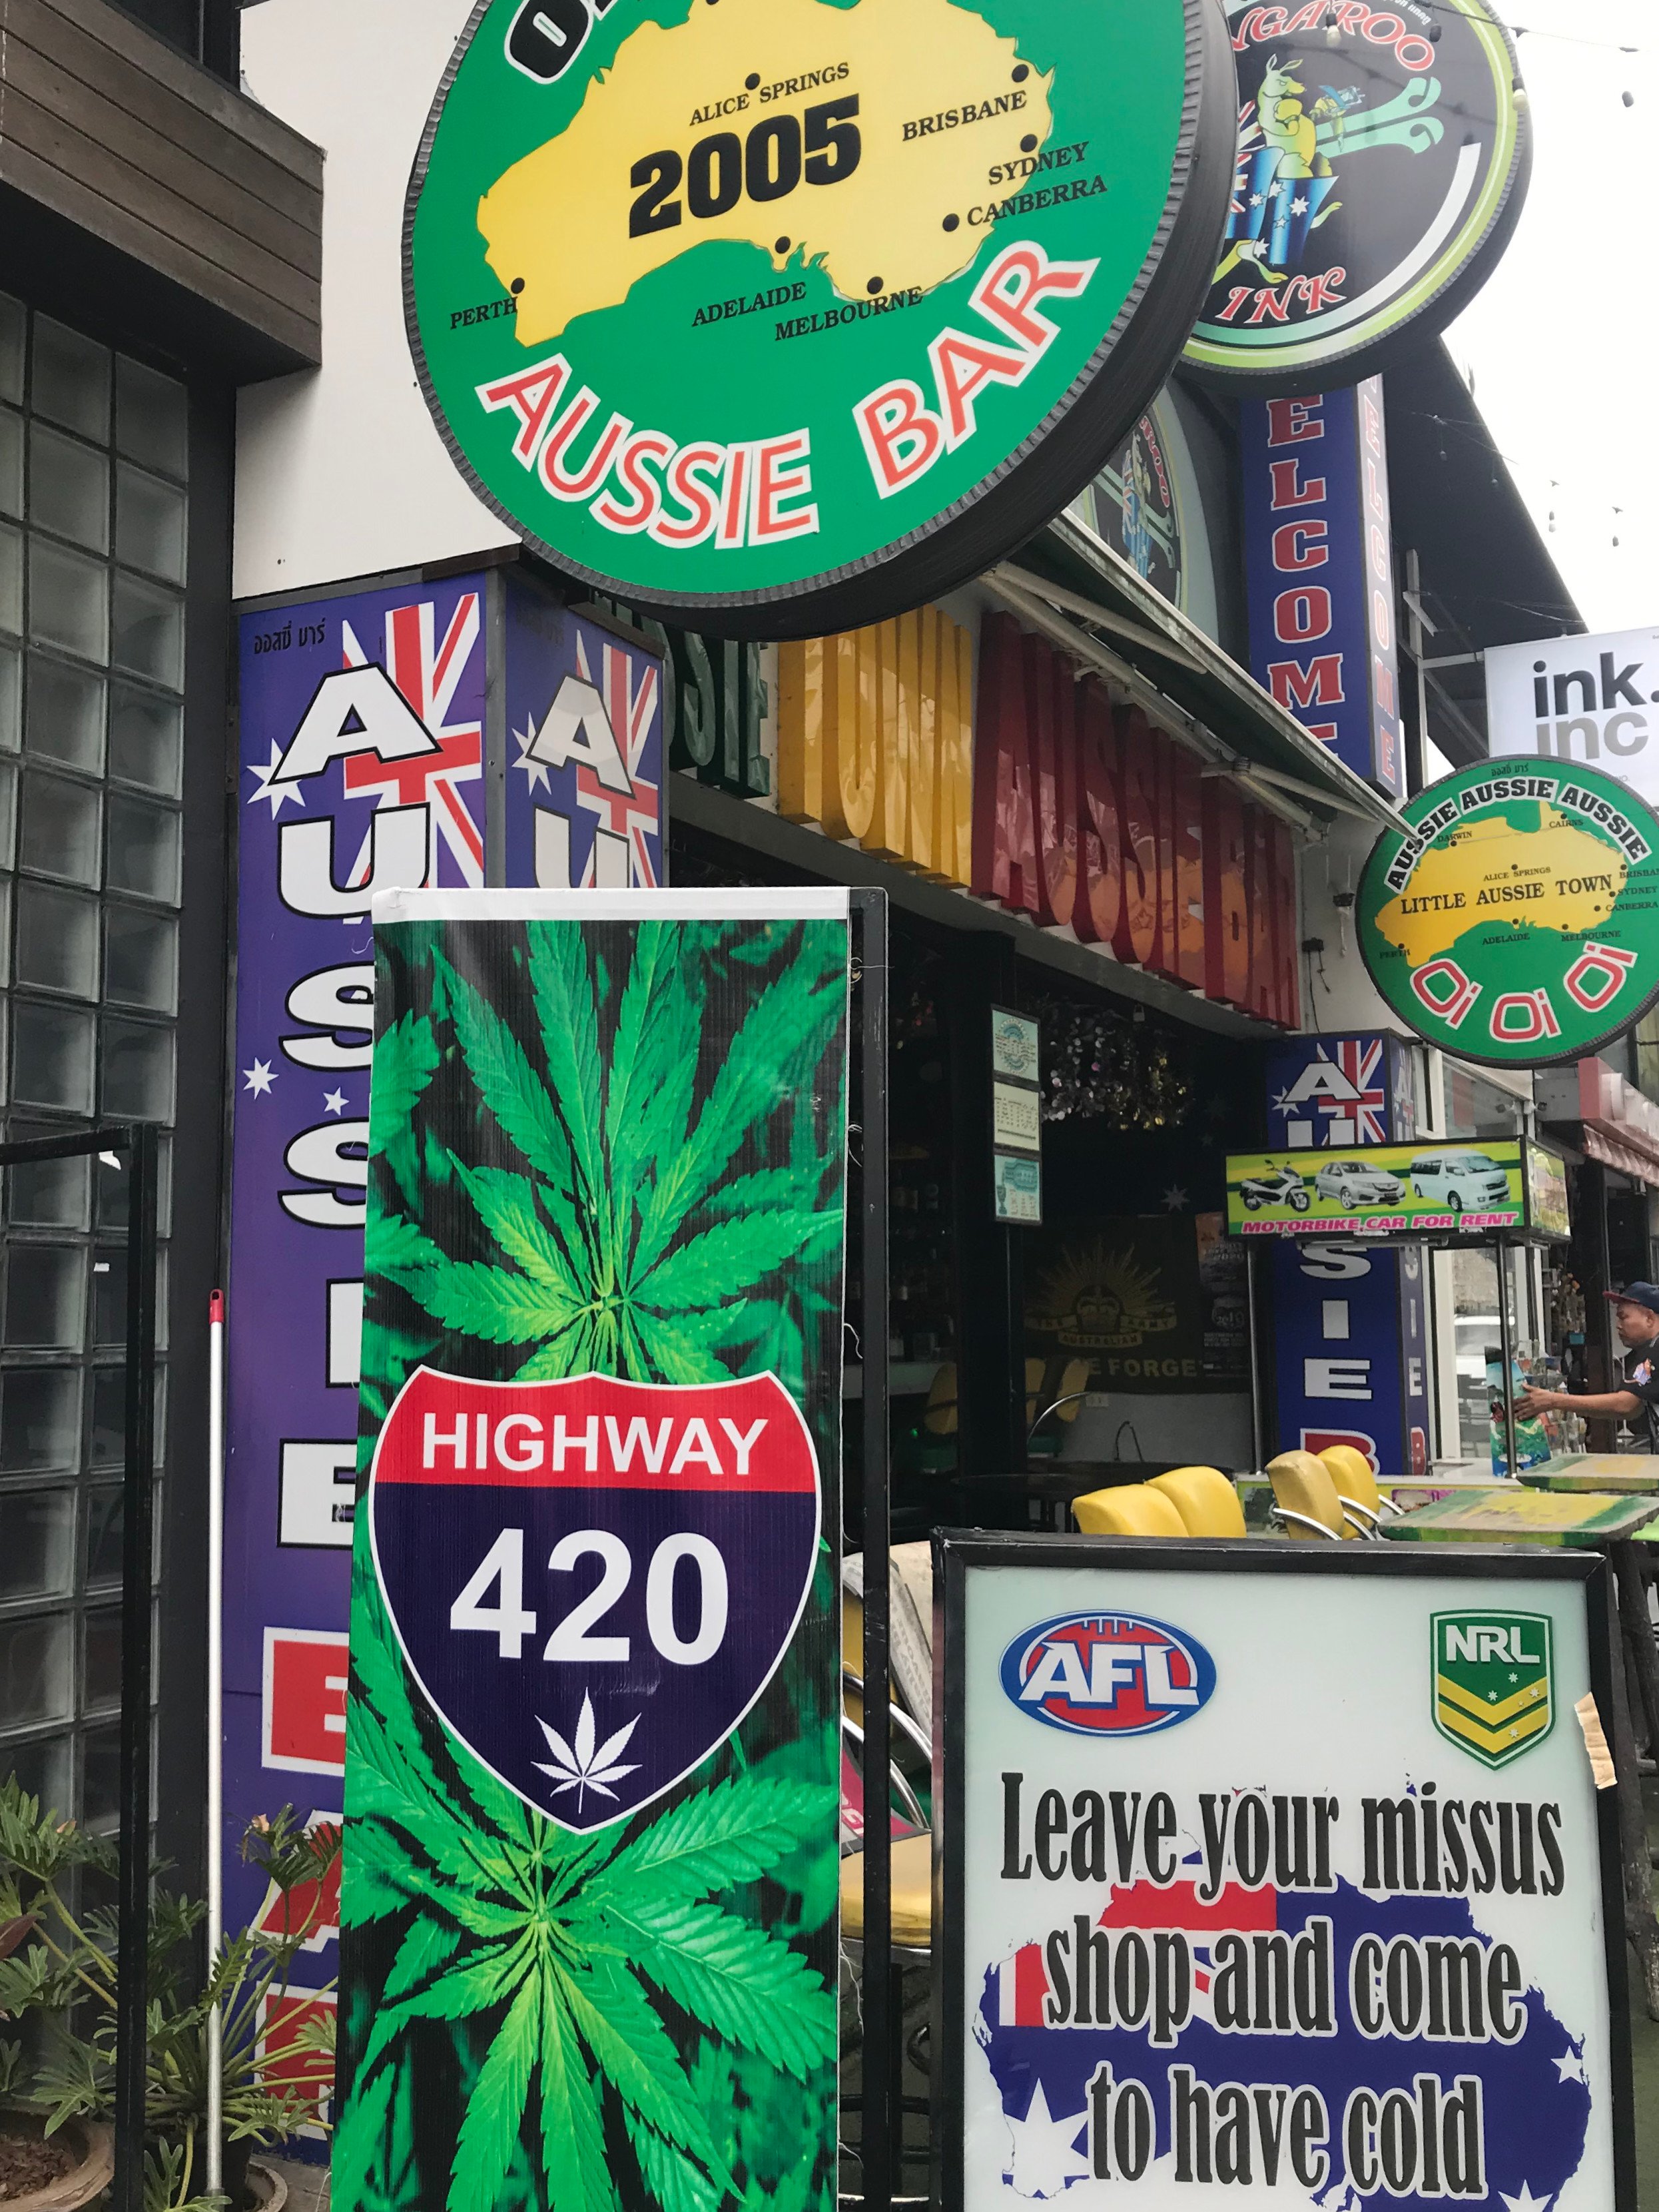 Marijuana signs are now omnipresent in Phuket - even outside this Australian-style pub. Photo: Dave Smith